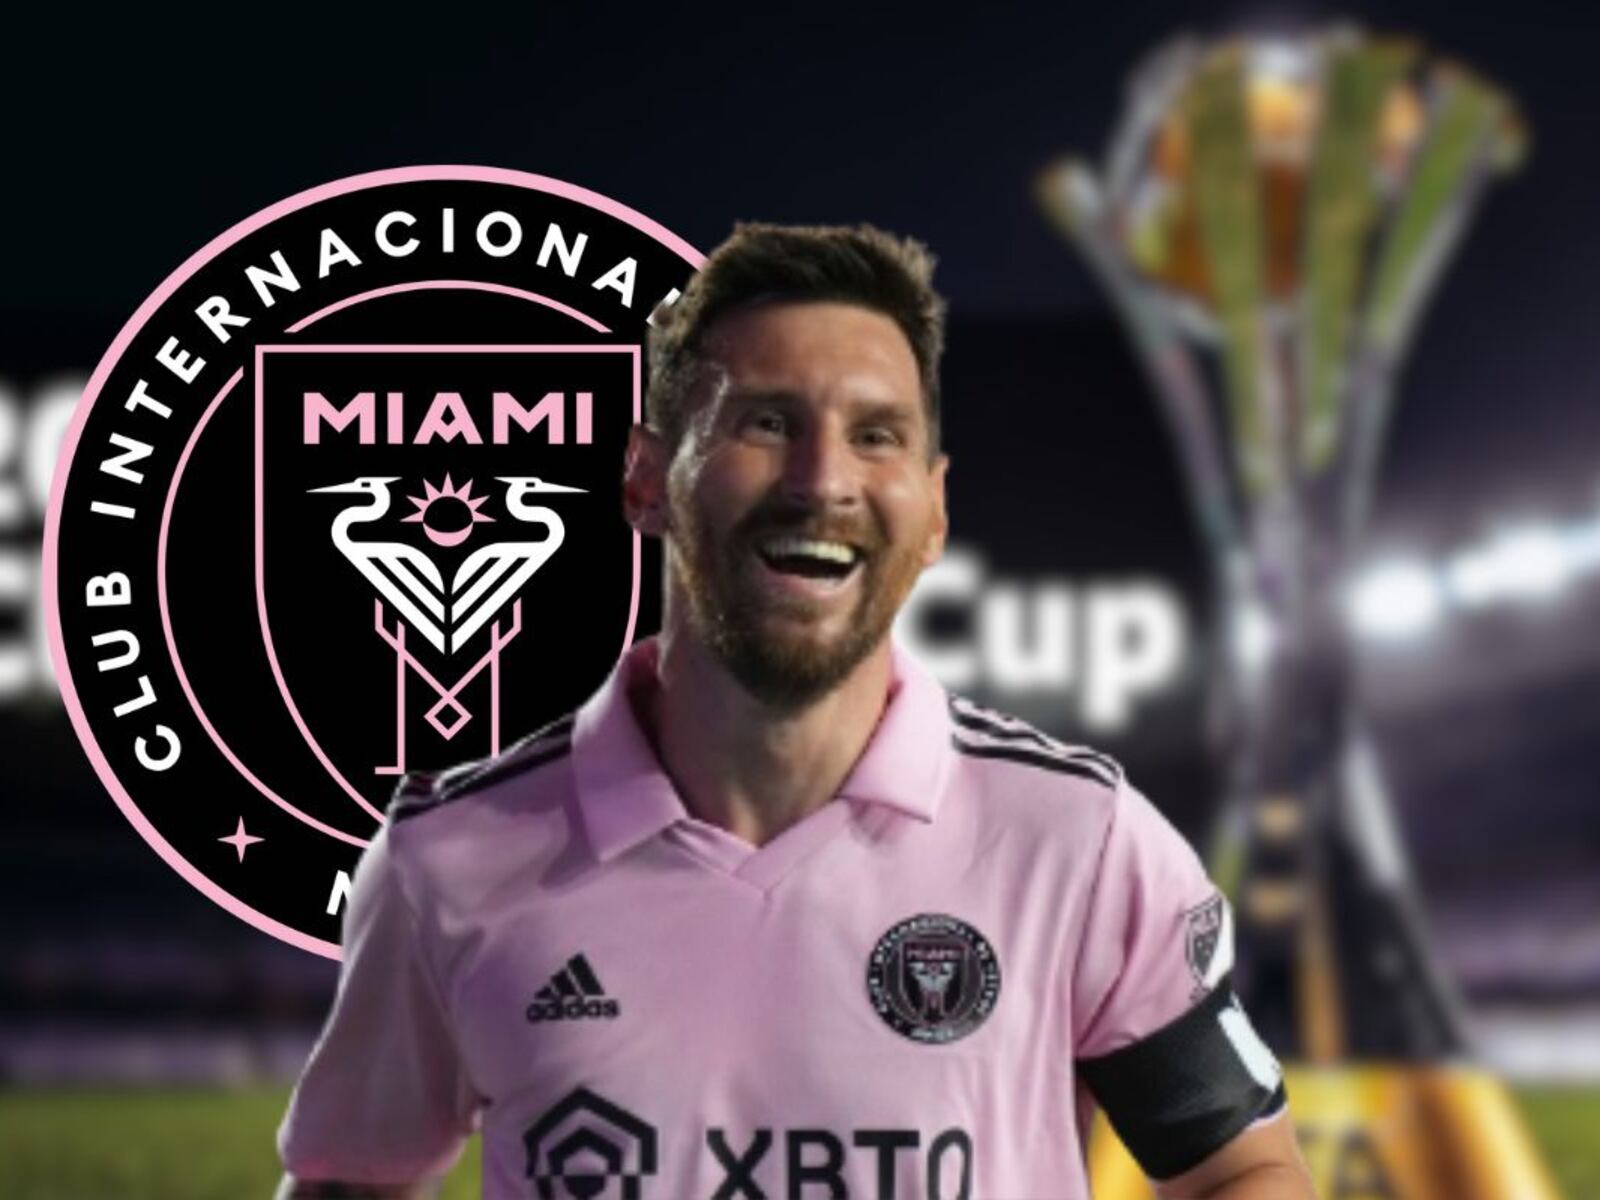 The new FIFA World Club Cup sponsor that may help Messi and Inter Miami to play the tournament